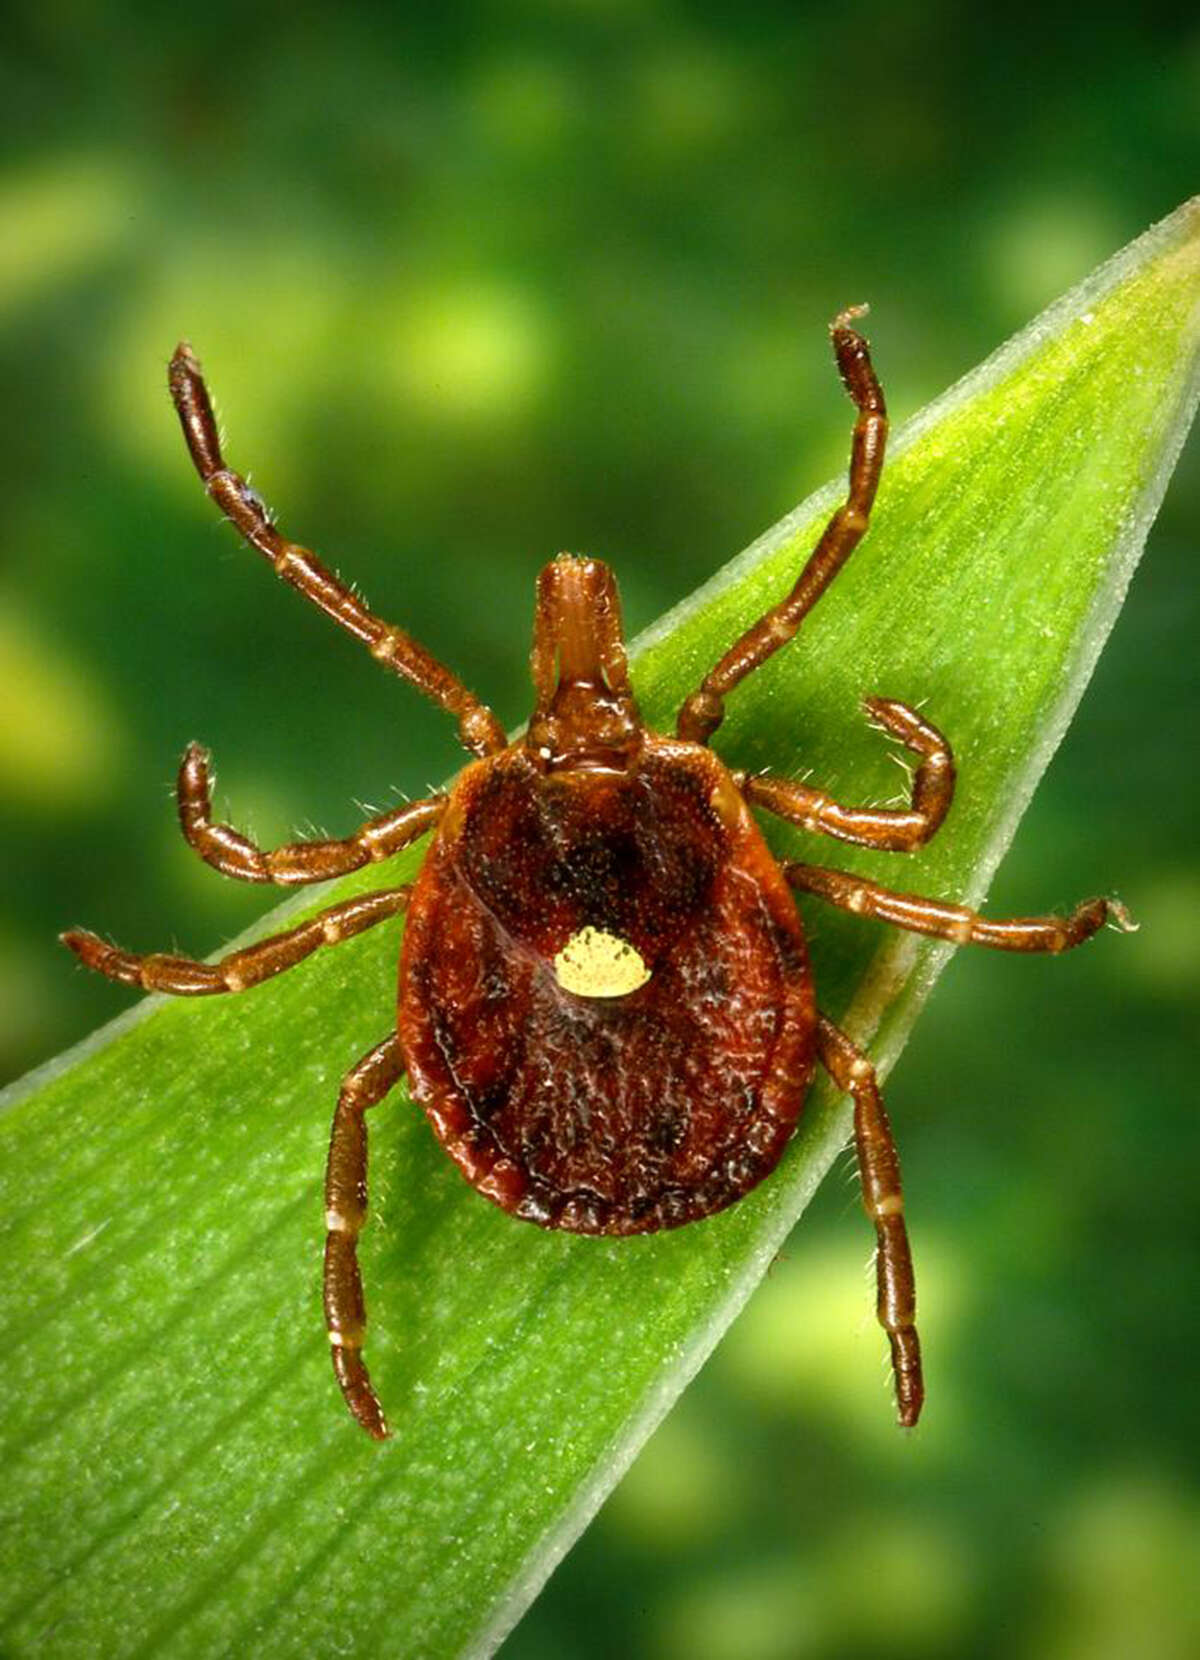 With the number of tick bites on the rise, watch out for the Lone Star tick, a pest that causes an allergic reaction to red meat. See bugs to expect during the summer months and how to deal with them.